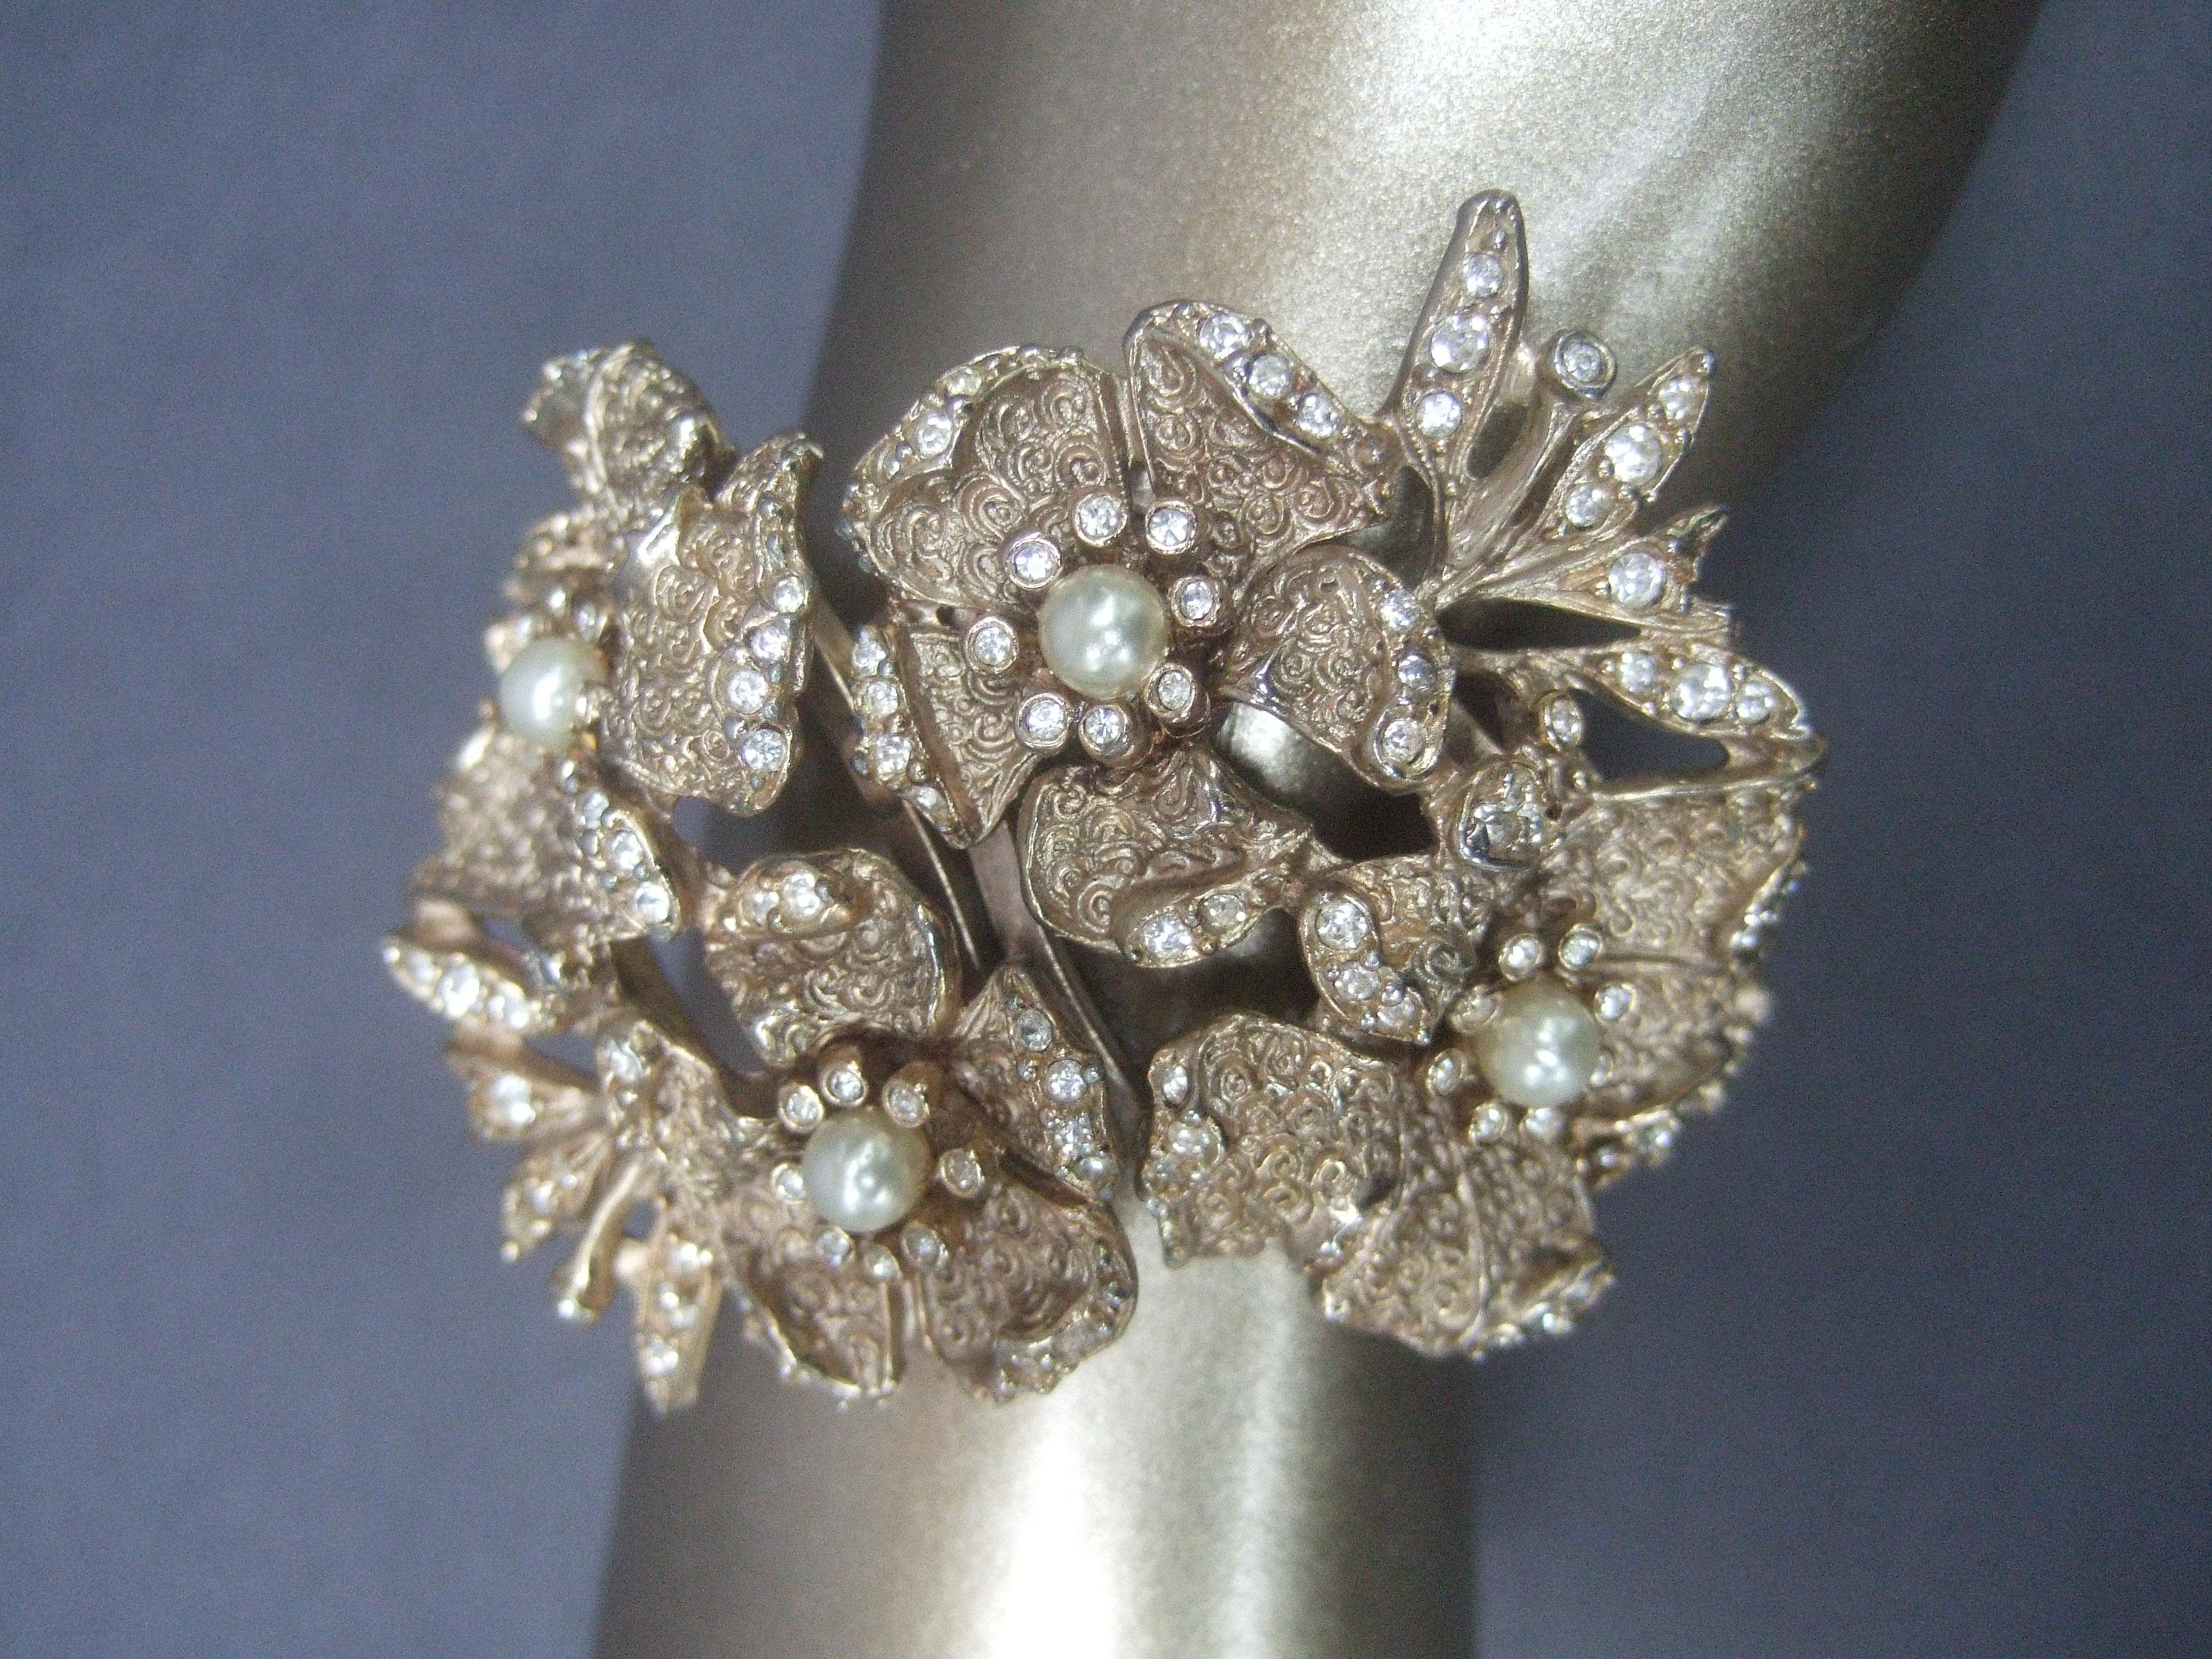 Hobe' wide gilt metal jewel encrusted hinged cuff bracelet c 1960s
The large scale floral bracelet is embellished with clusters of resin enamel faux pearls; juxtaposed with tiny diamante crystals scattered across the collection of flower pedals

The